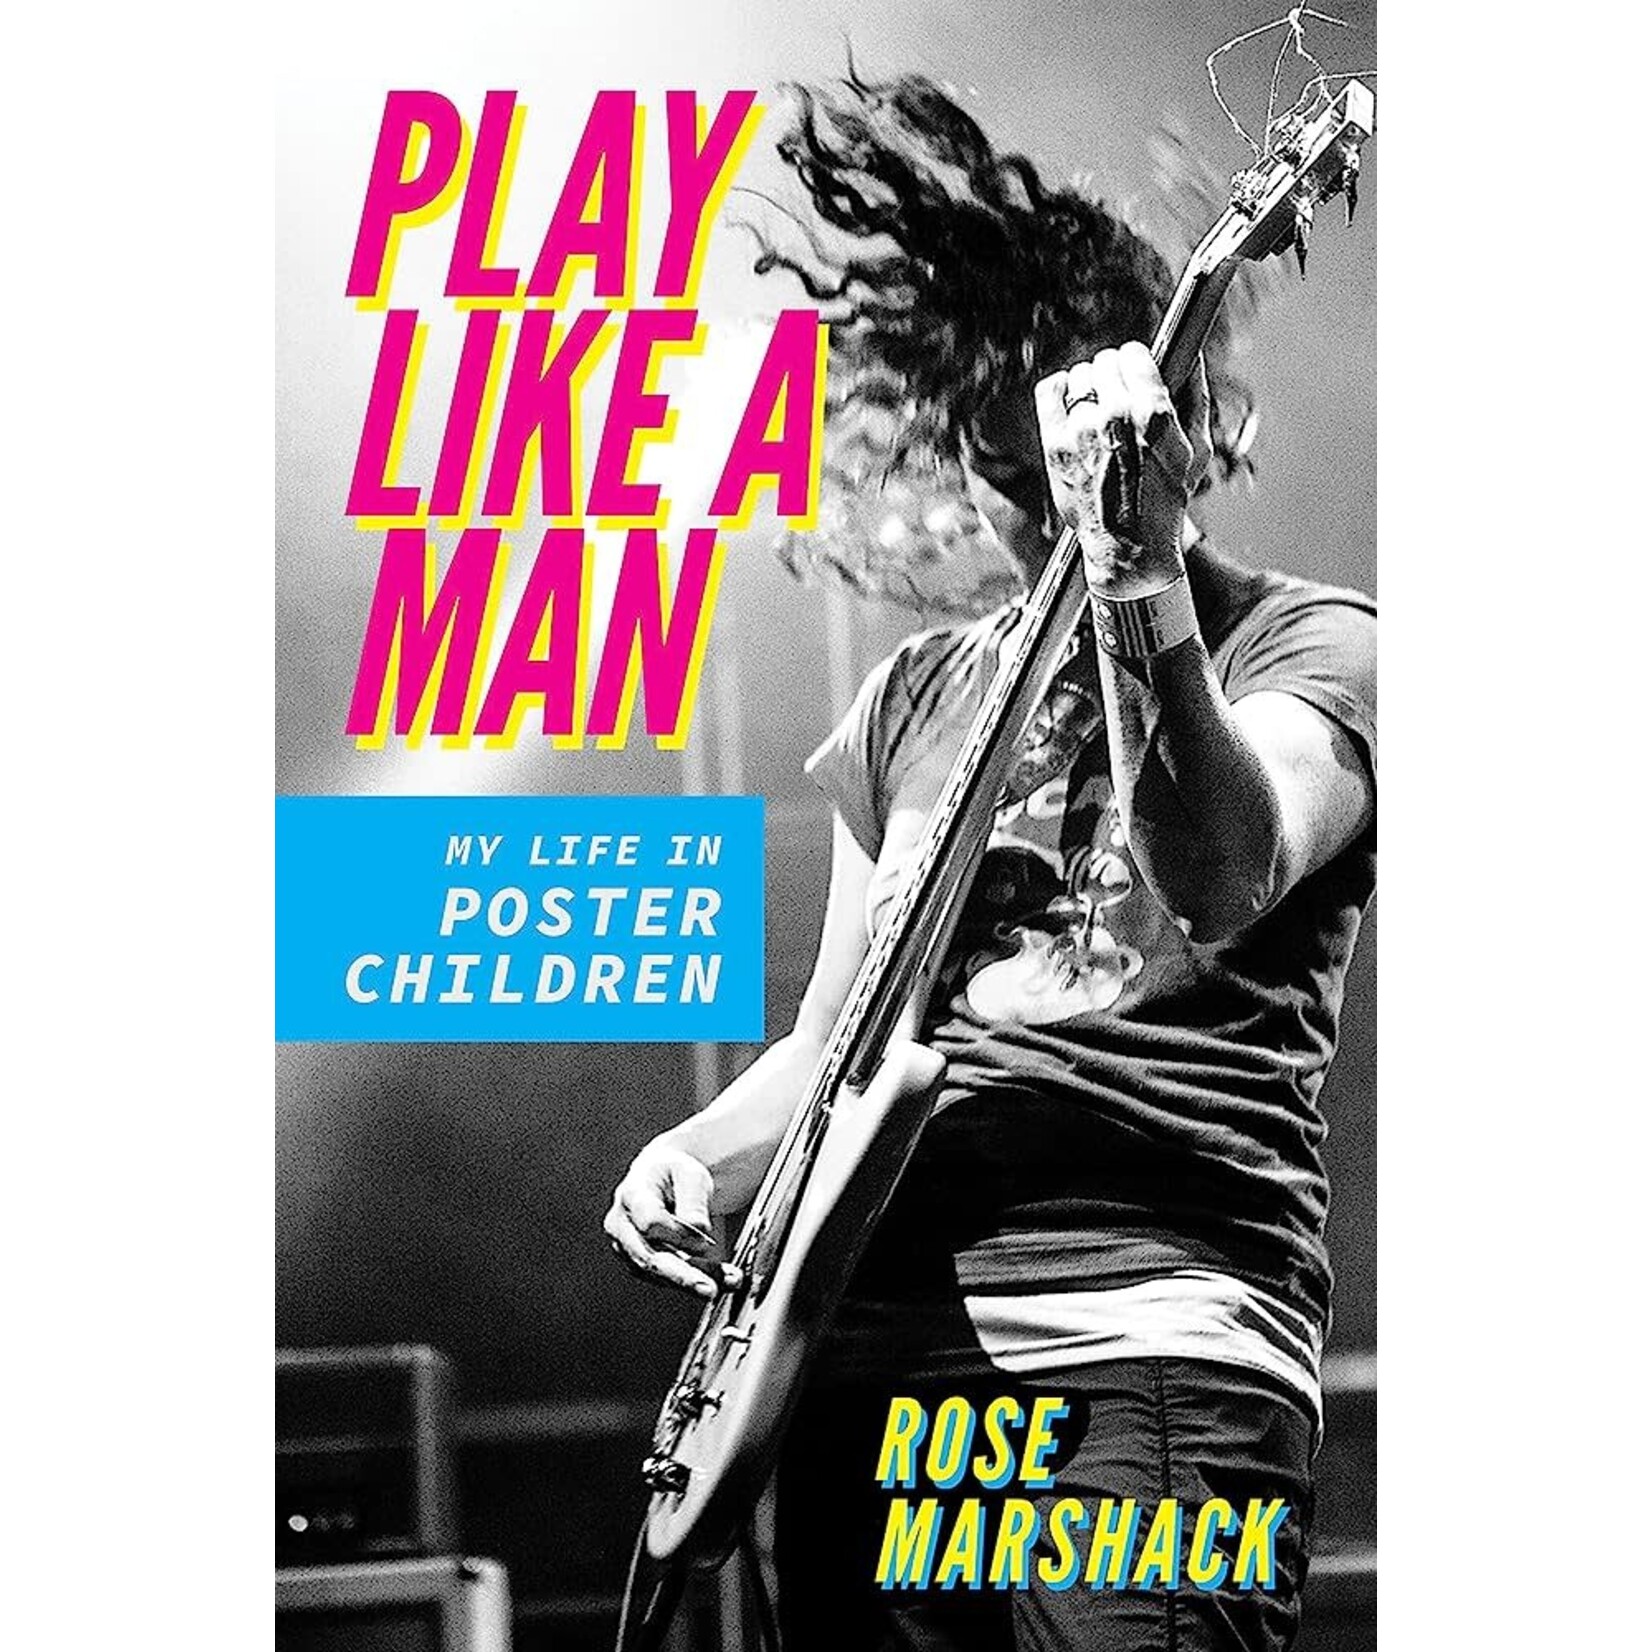 Play Like A Man by Rose Marshack (Book)